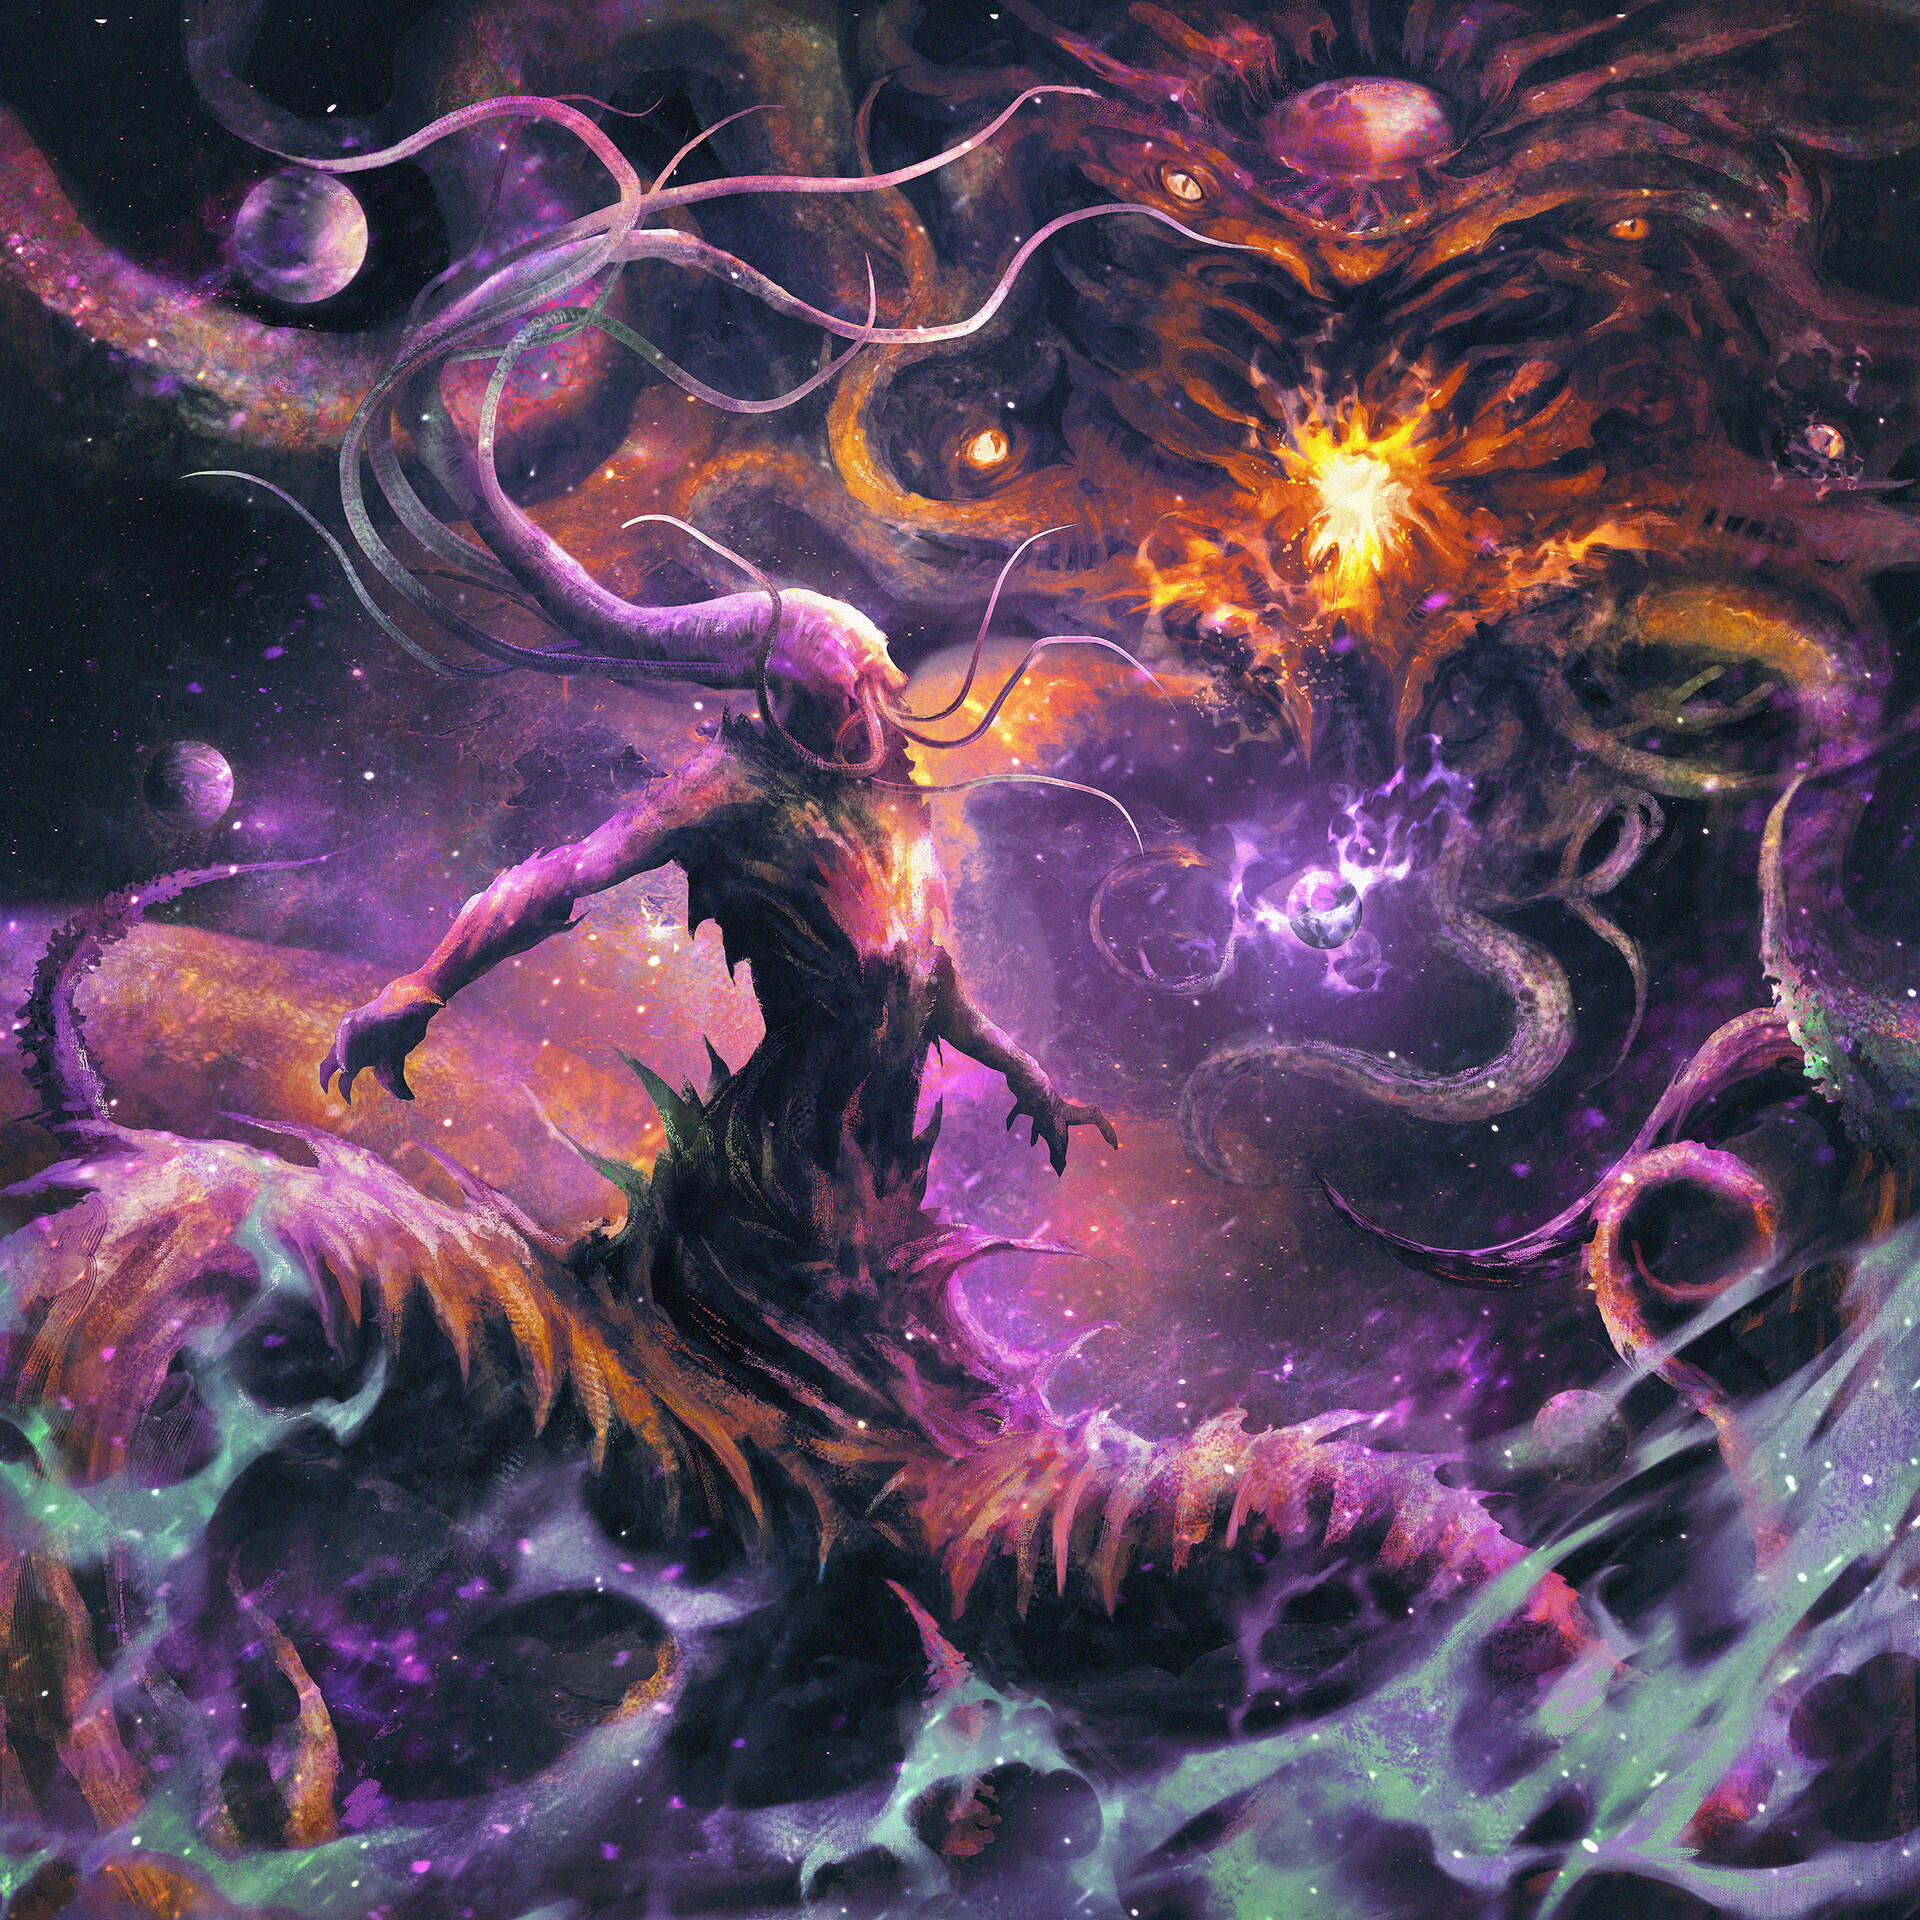 Andrew Christanetoff By The Abyss (Azathoth and Nyarlathotep)